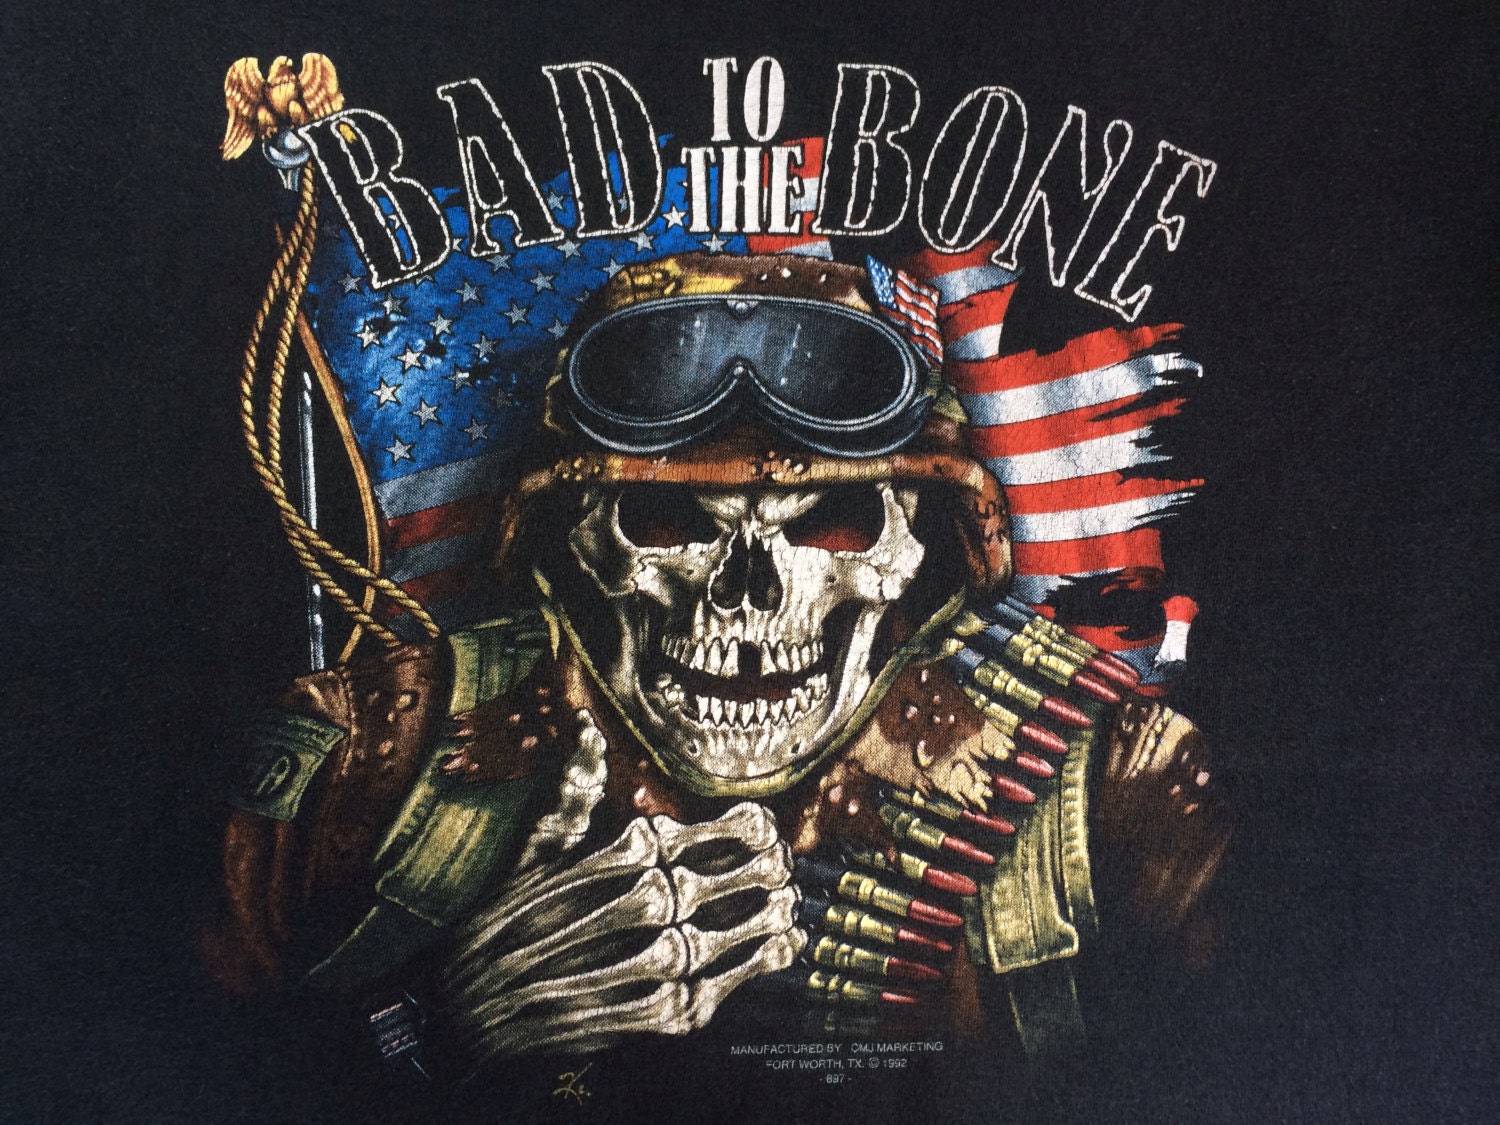 Didn't realize I had found a 3D emblem shirt until I looked it up :  r/VintageTees